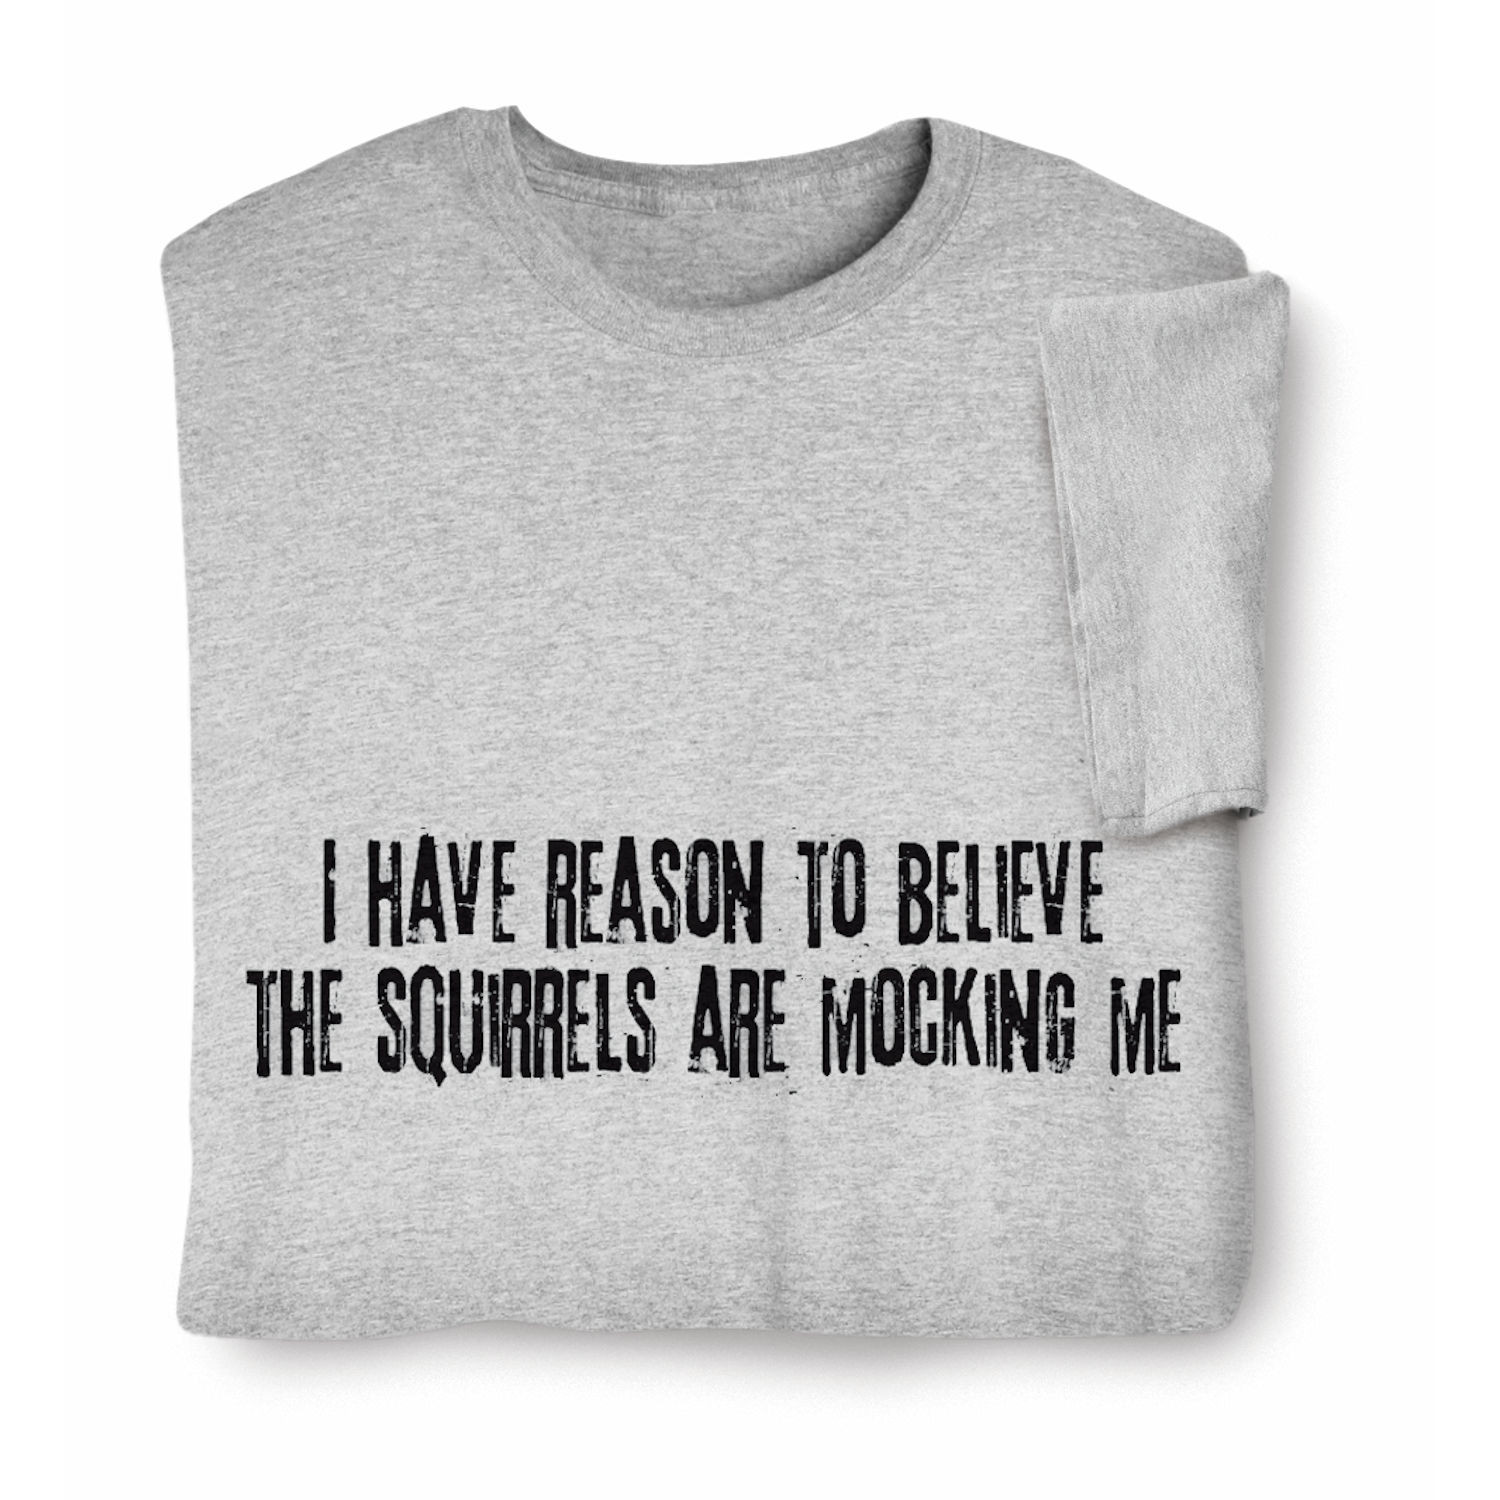 I Have Reason to Believe the Squirrels Are Mocking Me Shirts | Shop.PBS.org